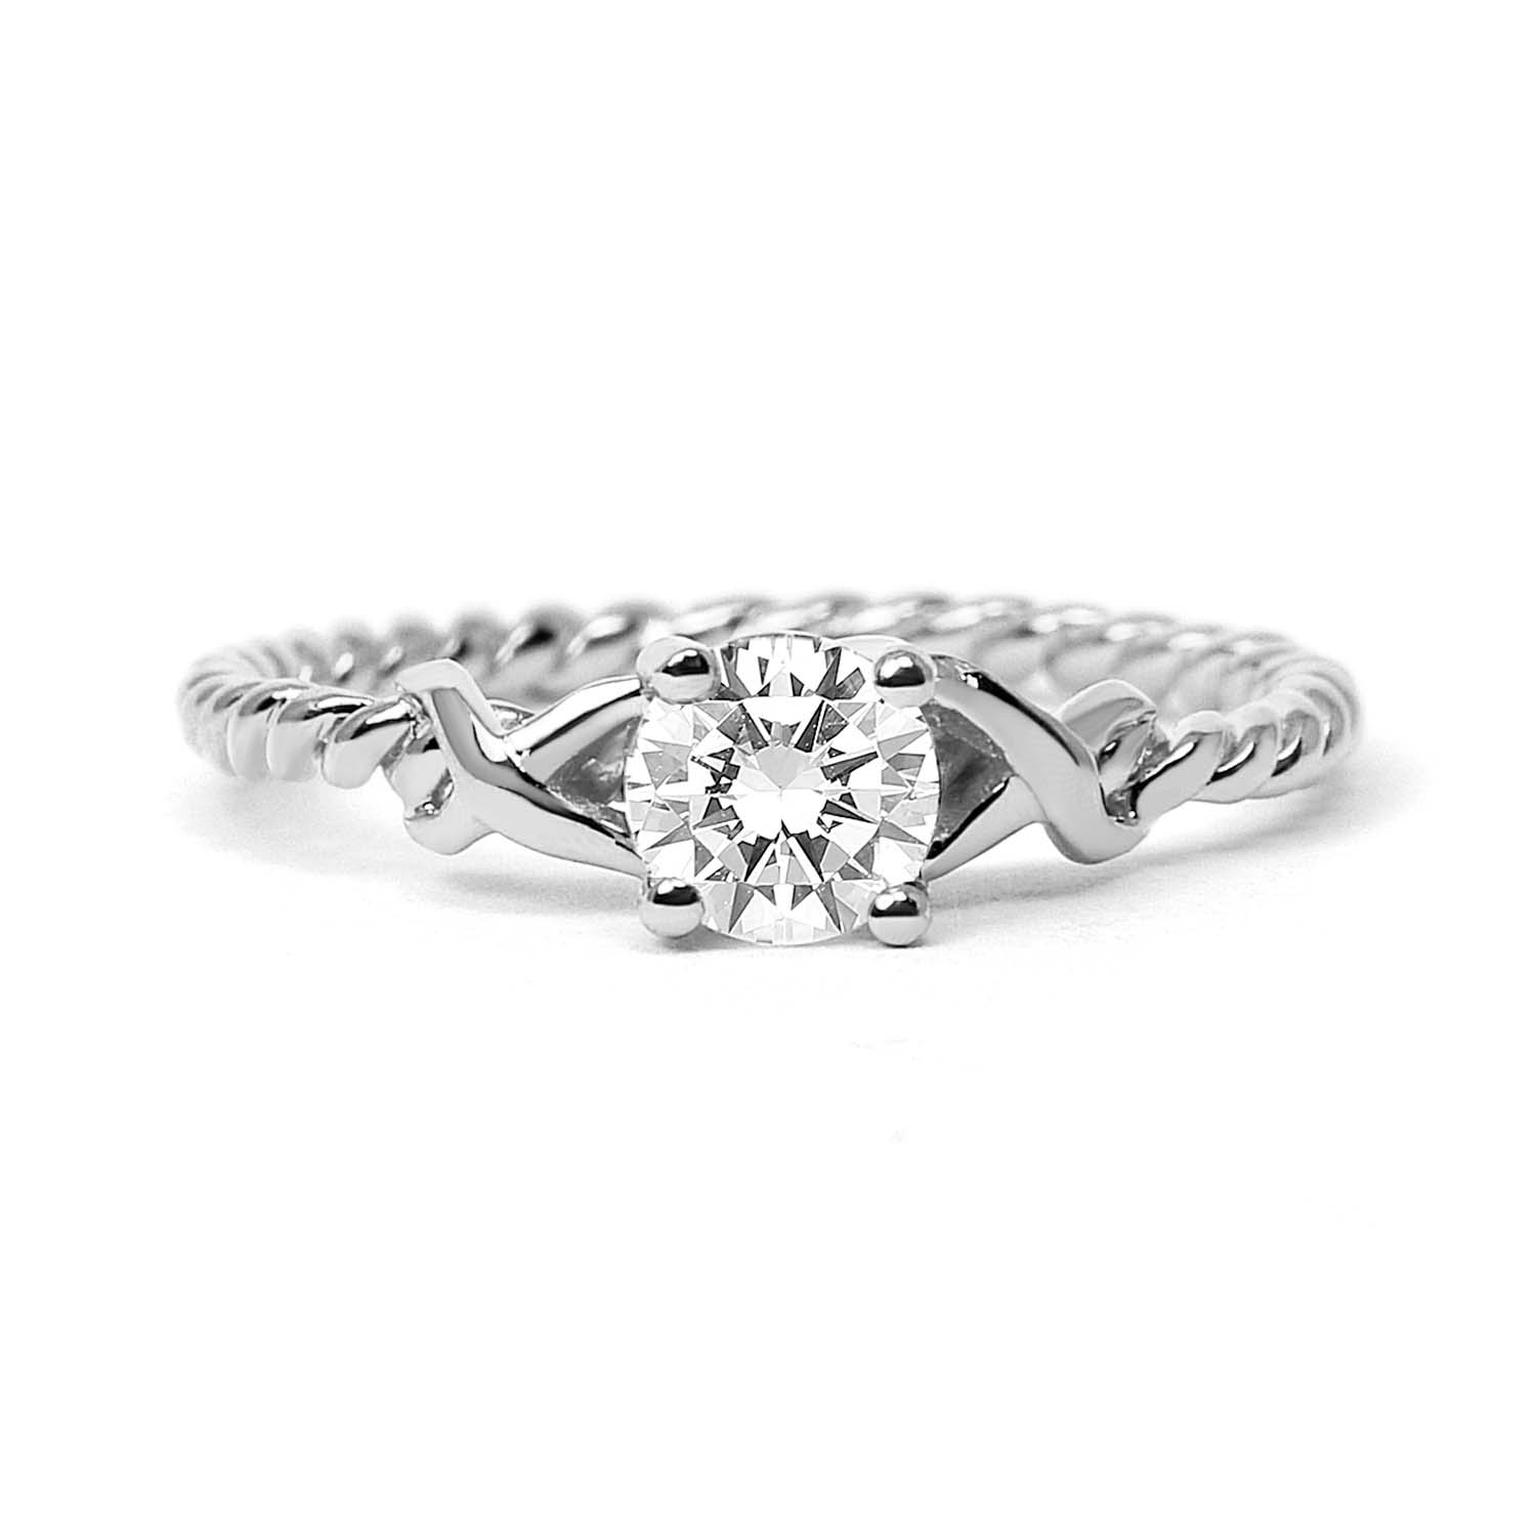 Arabel Lebrusan Braided ethical diamond engagement ring, made from recycled platinum (from £2,170).